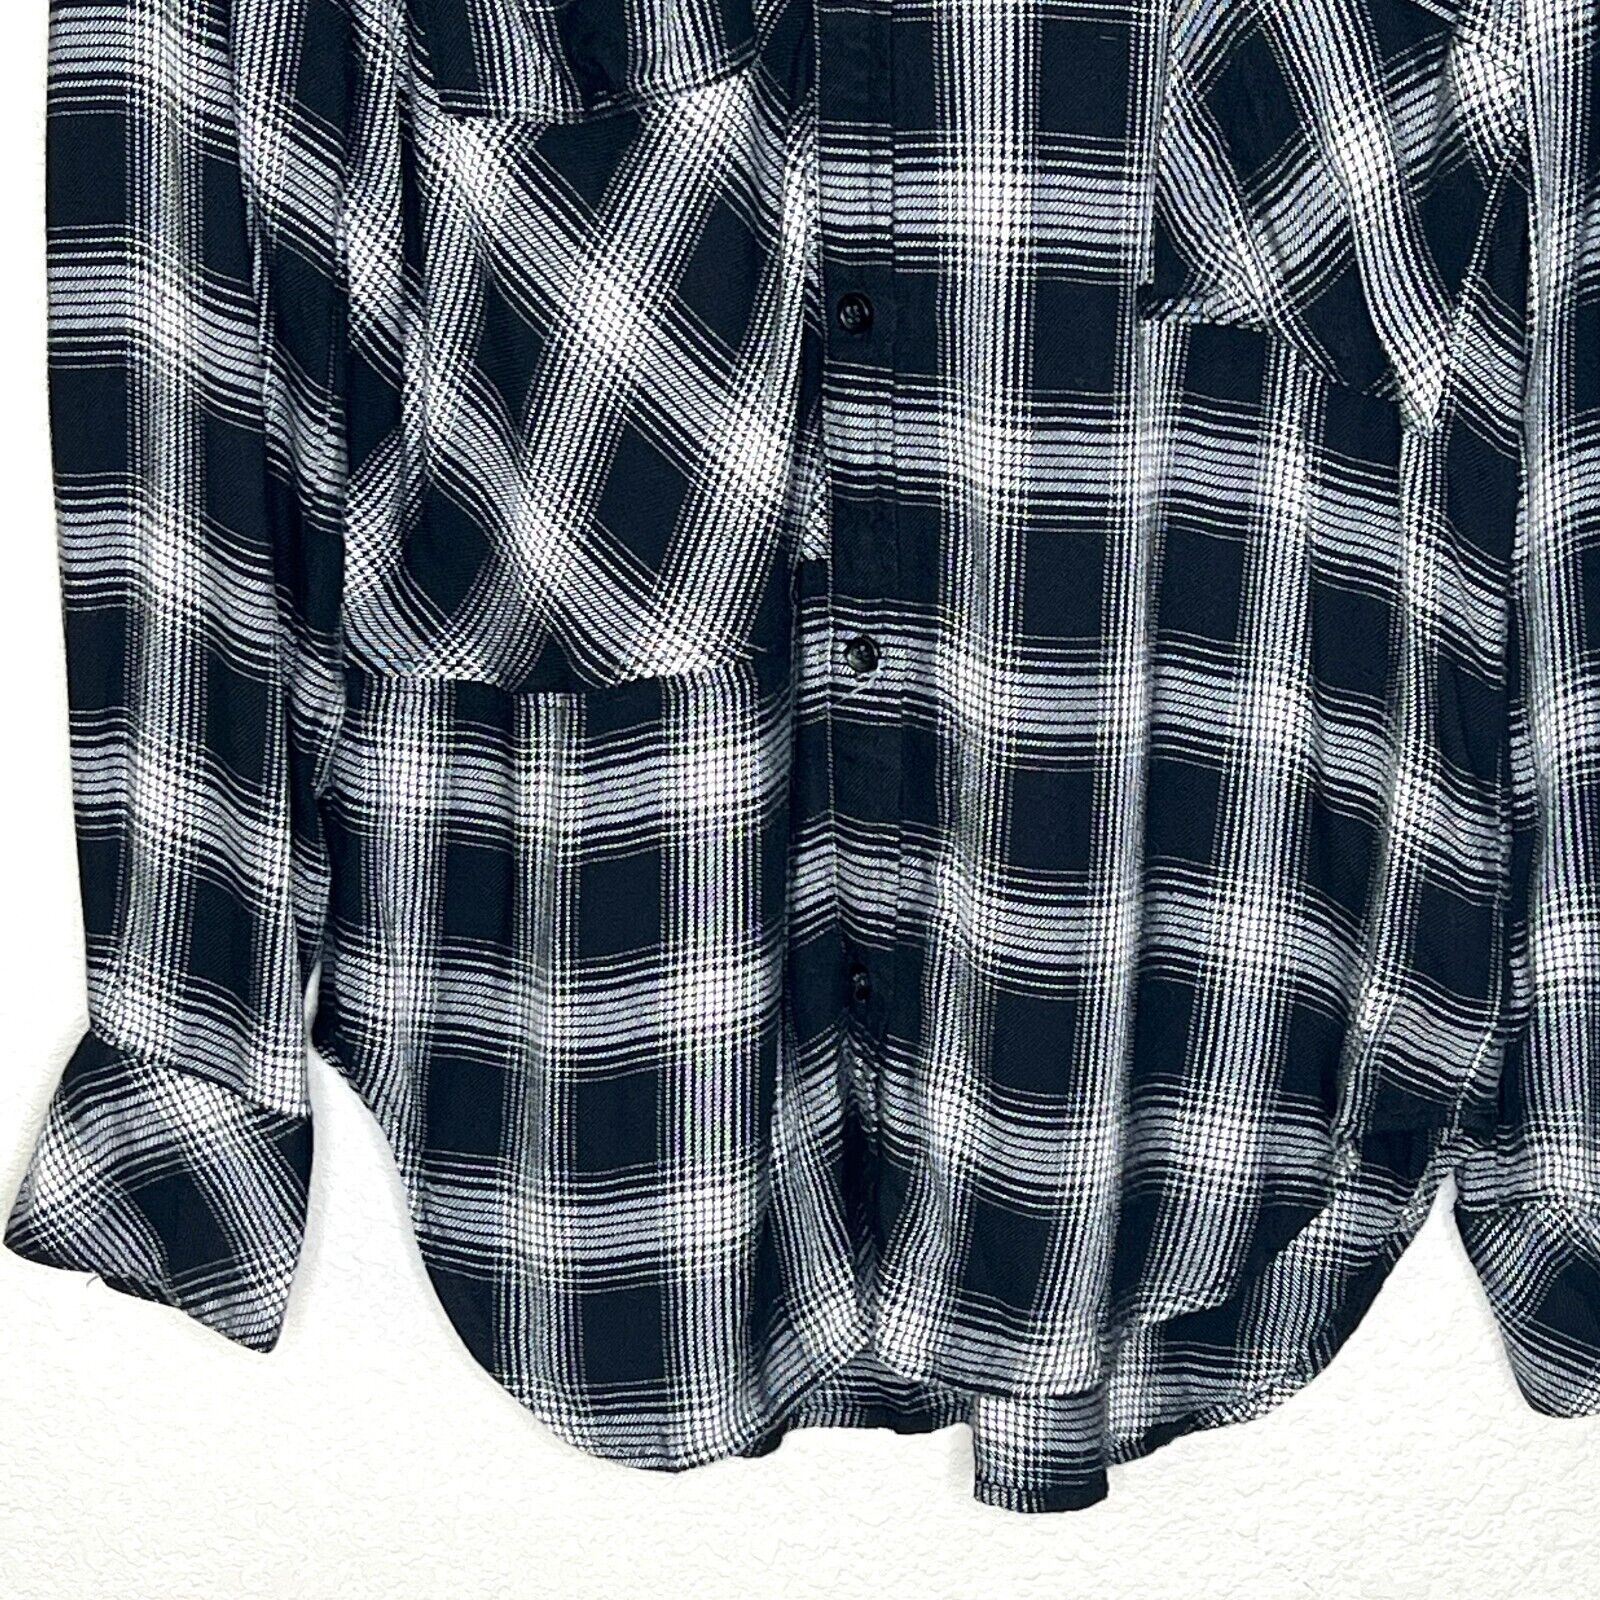 Current/Elliott The Patchwork Project Shirt in Phantom Plaid (1) Size Small